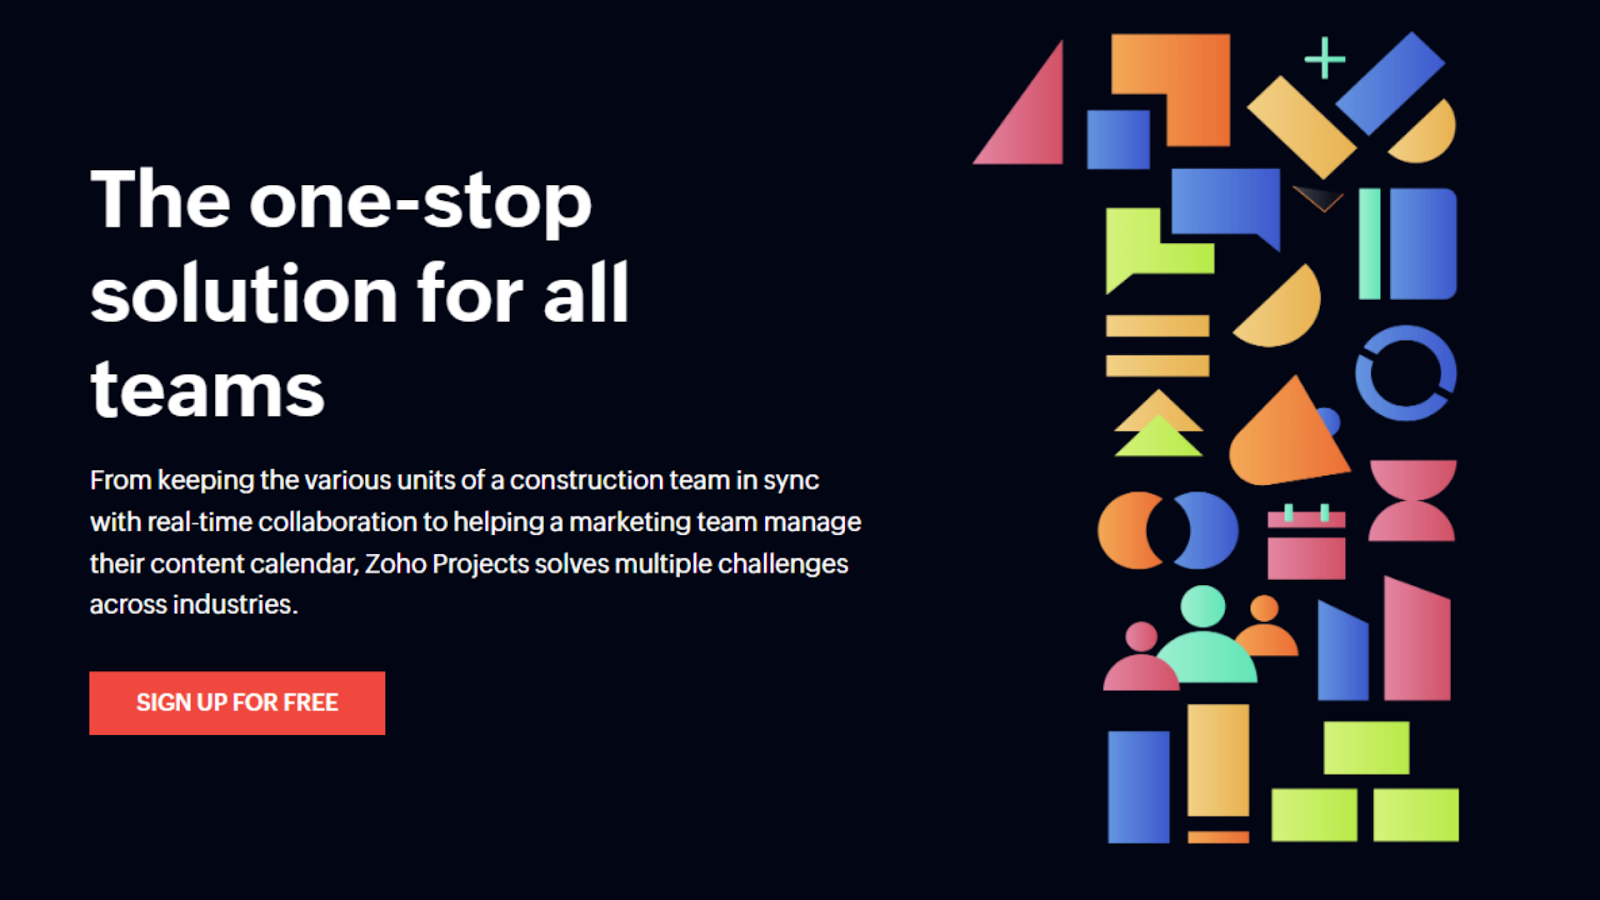 The Zoho Projects website